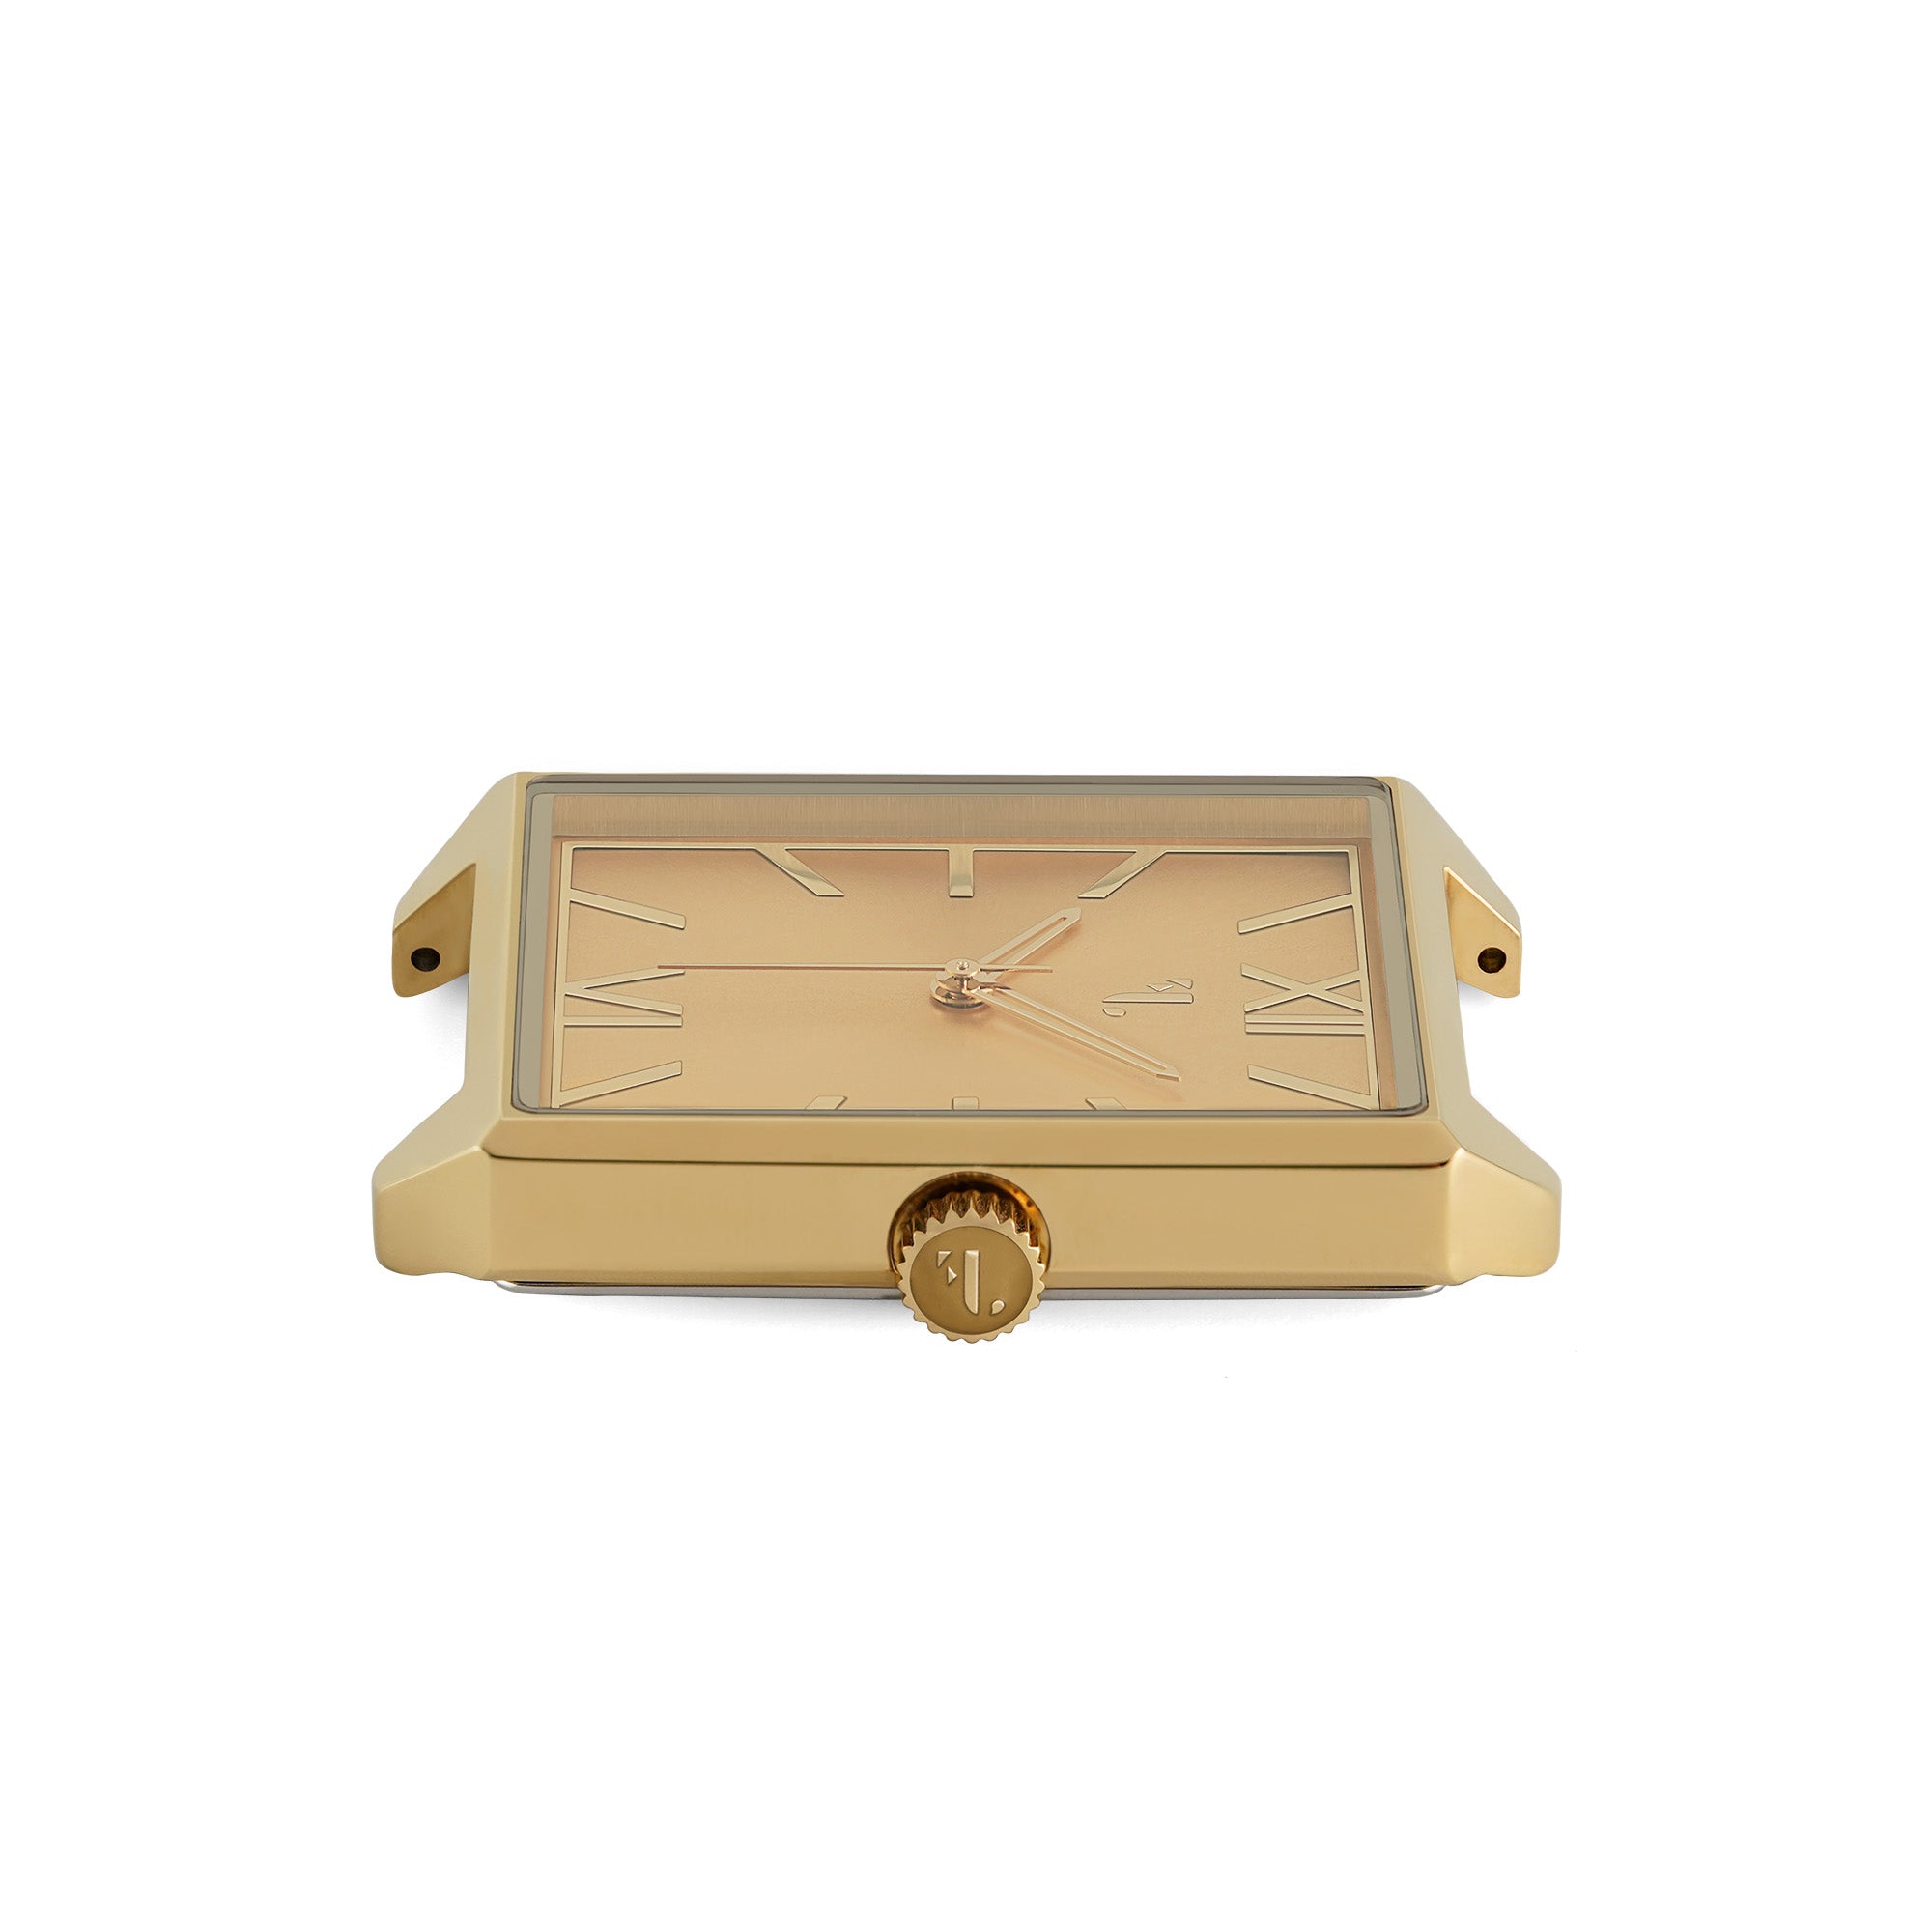 Men's monochrome gold watch with a modern square design and a sleek minimalist dial. This watch is designed in Montreal by Five Jwlry, it is equipped with a quartz mechanism and it has a water resistance of 5ATM!